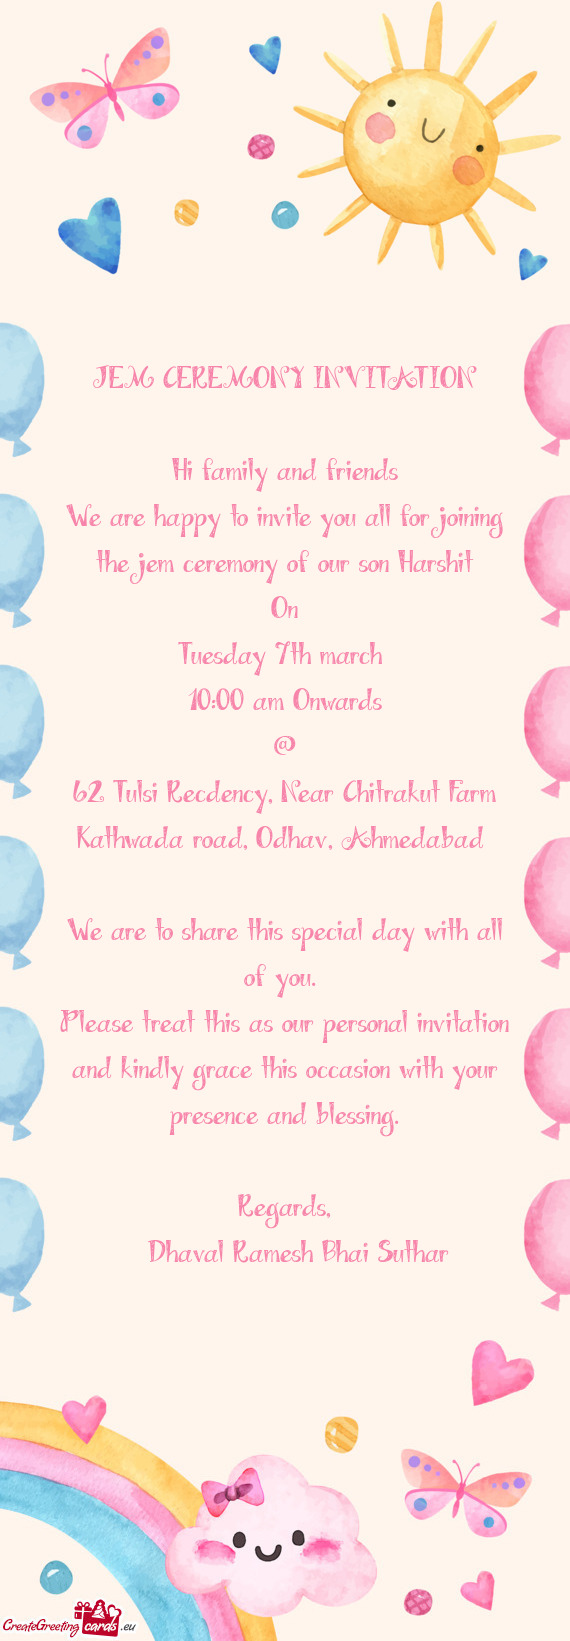 We are happy to invite you all for joining the jem ceremony of our son Harshit